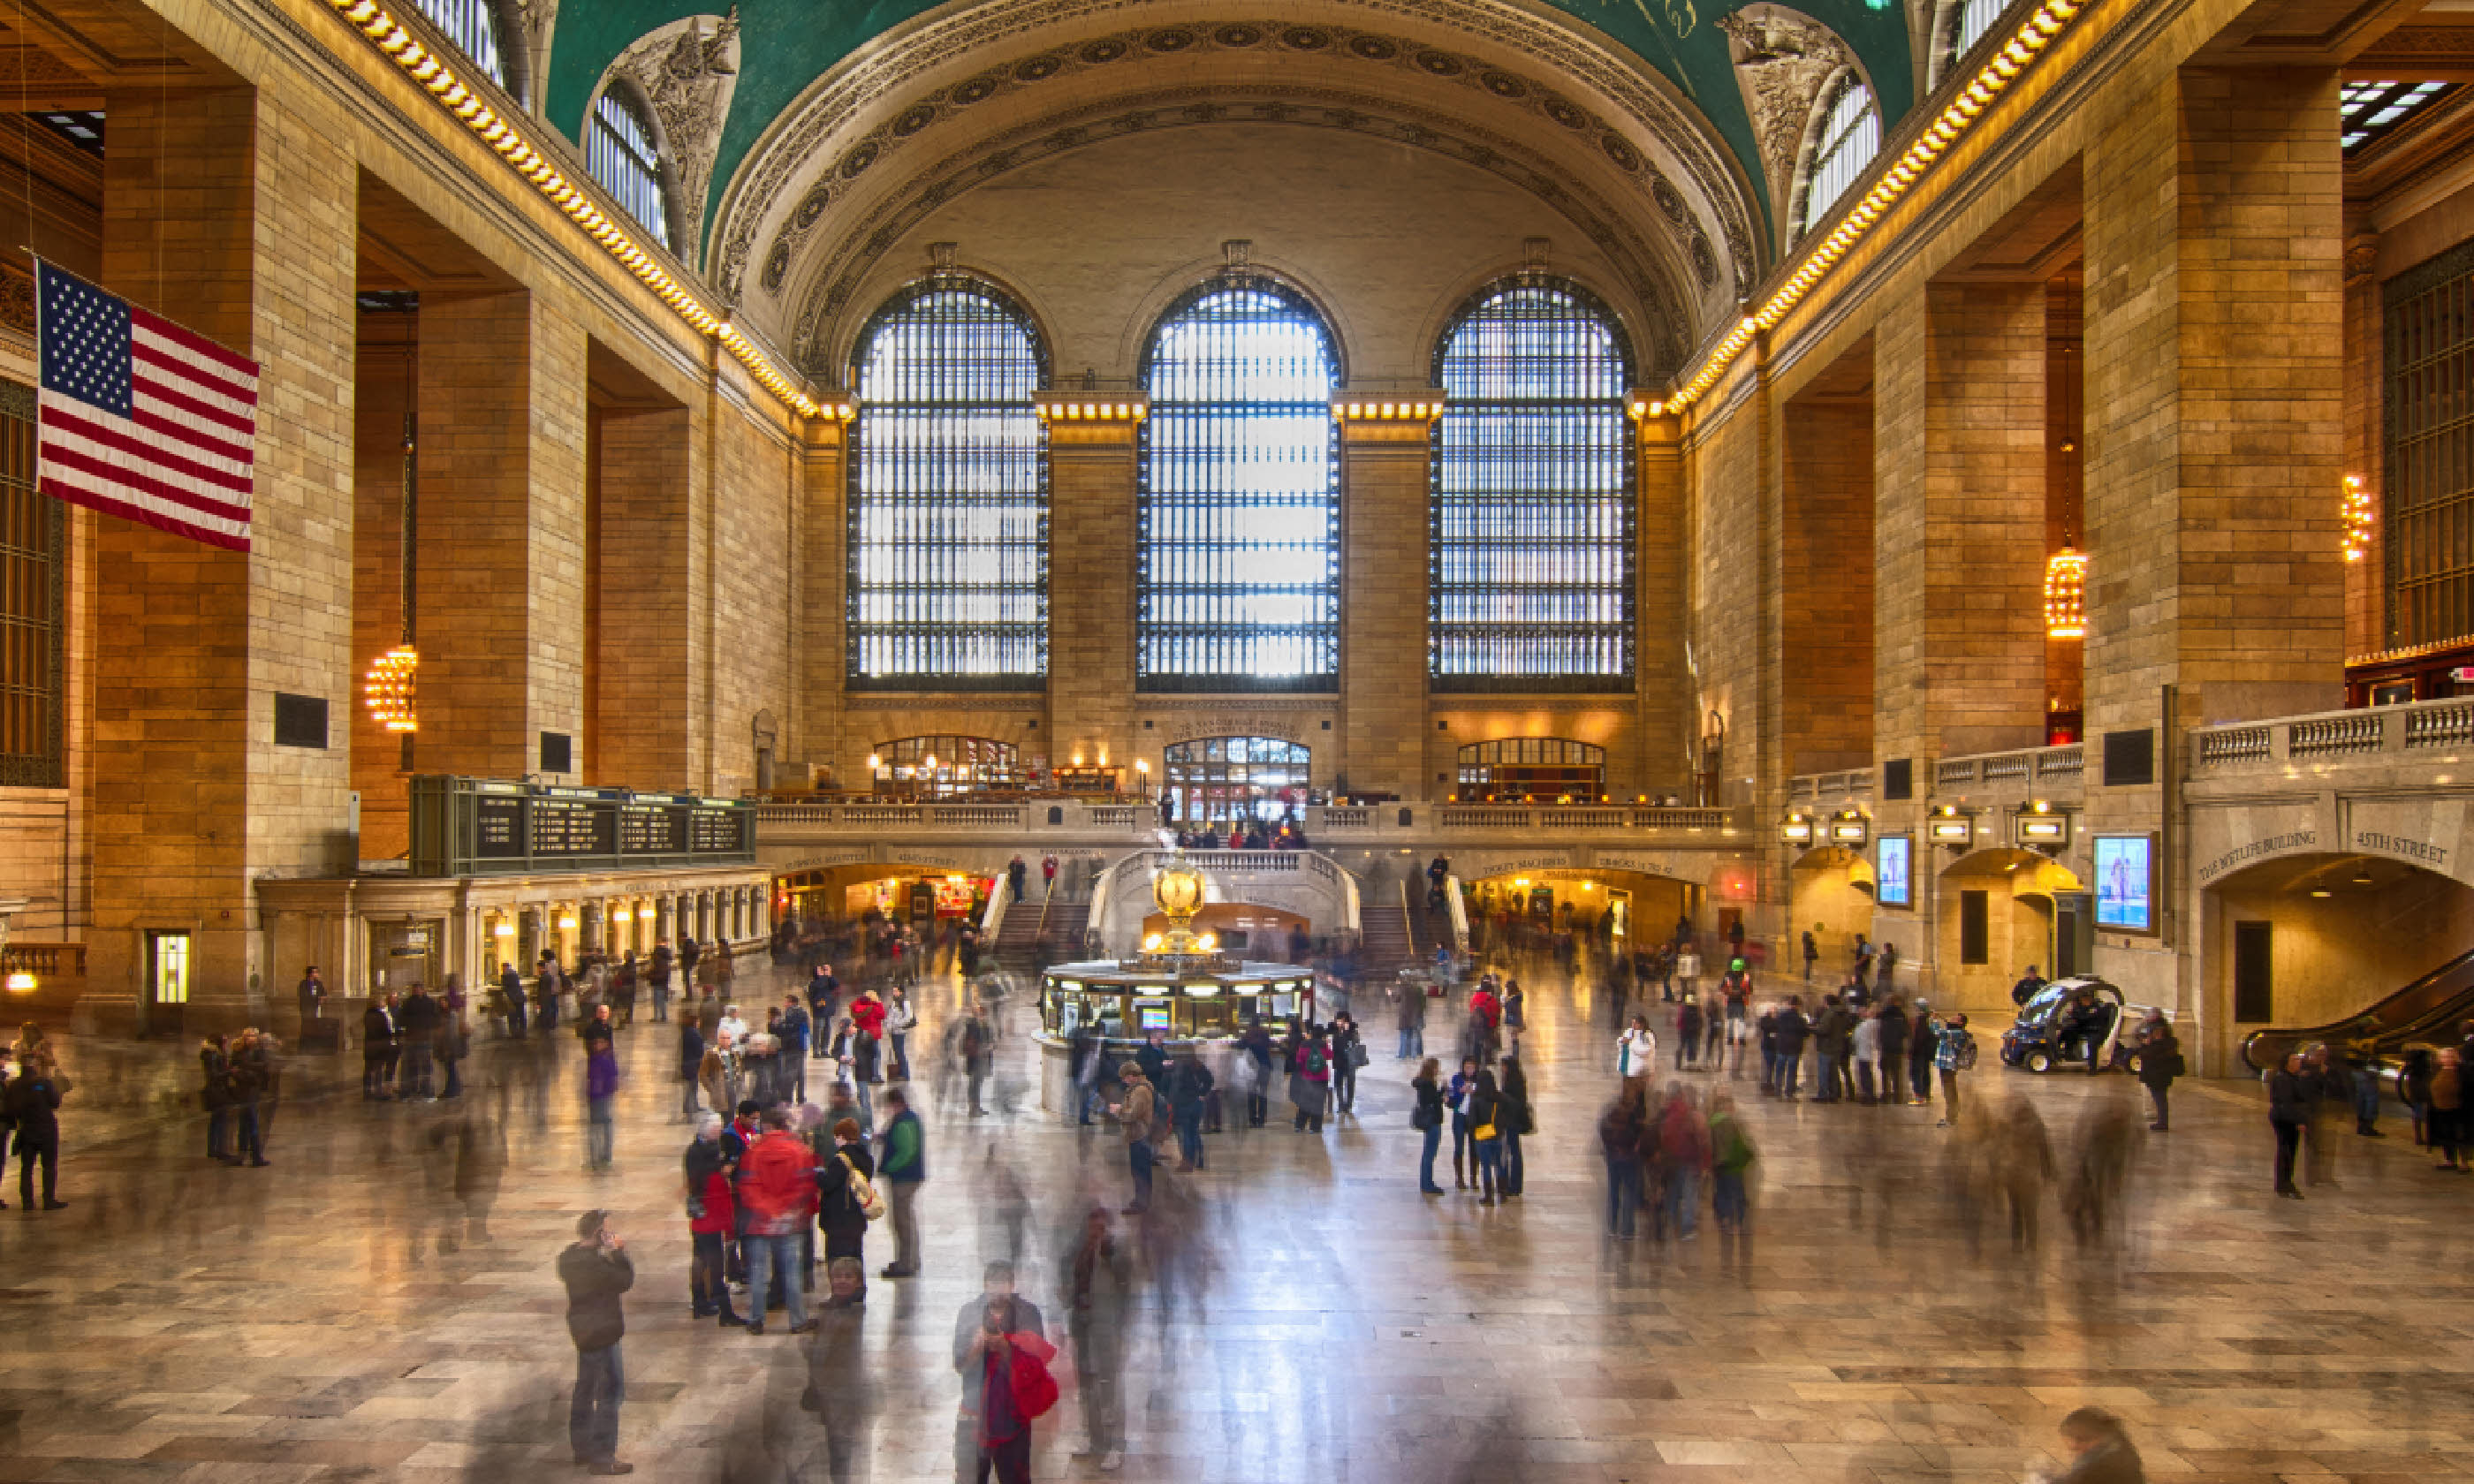 Grand Central Station (Shutterstock: see credit below)